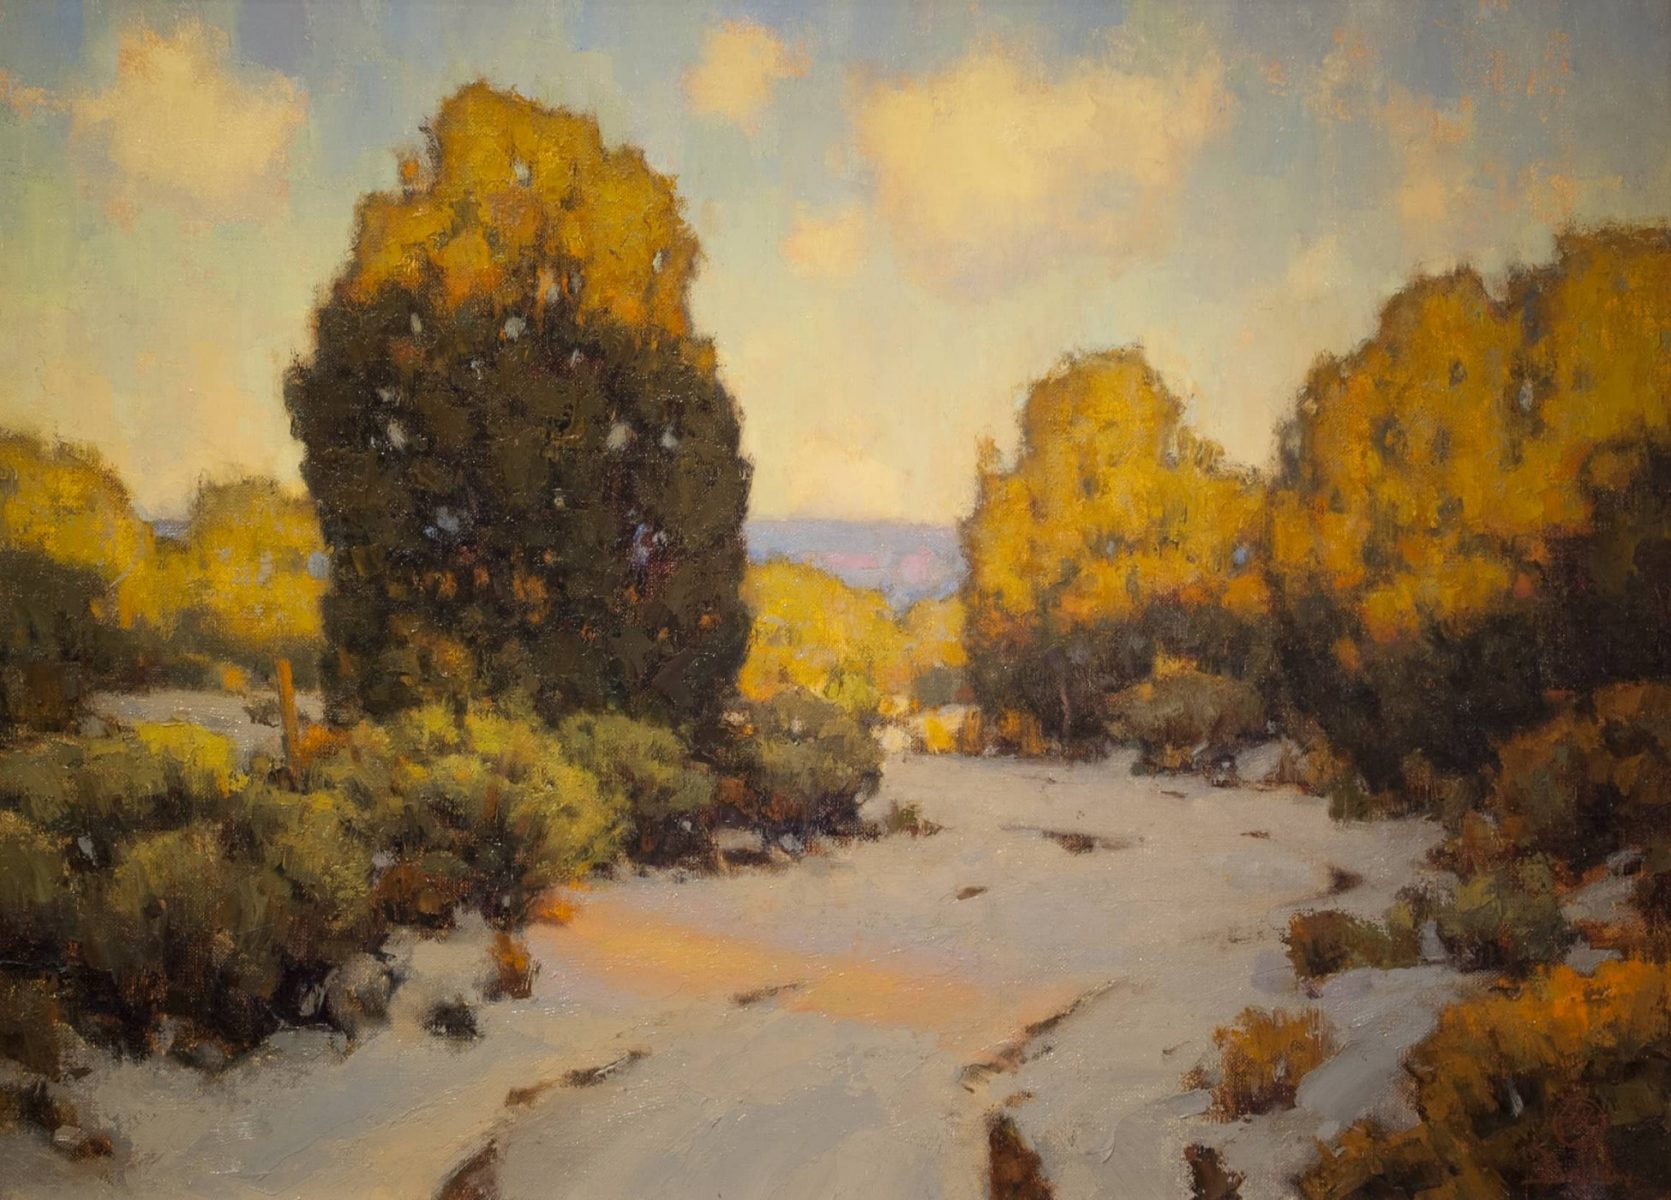 Landscape oil painting by David Ballew